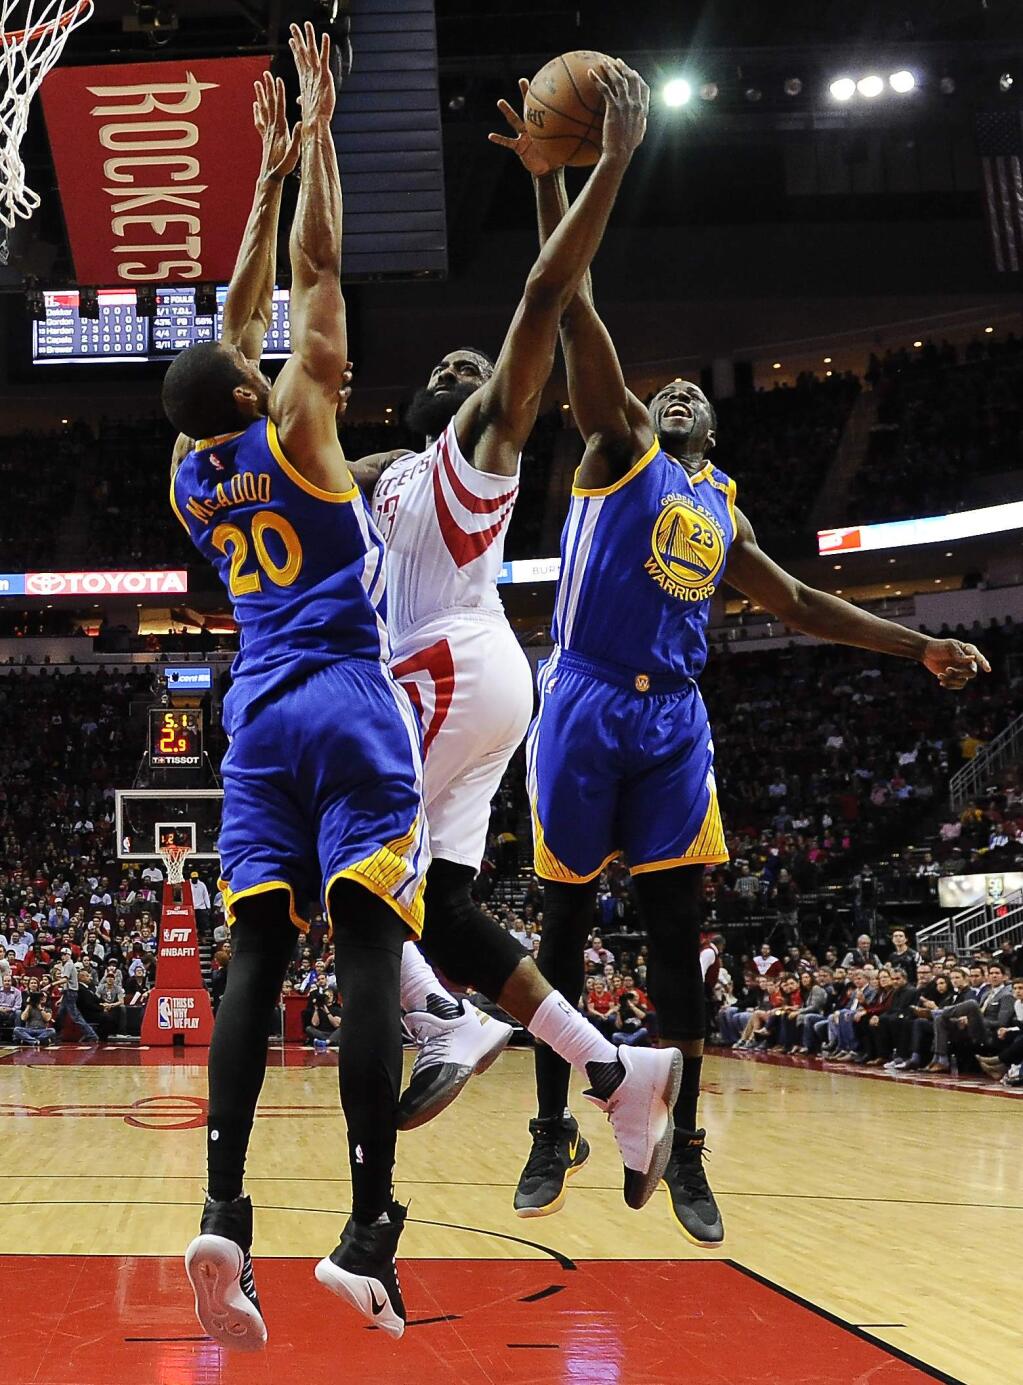 Golden State Warriors forward Draymond Green (23) blocks the shot of Houston Rockets guard James Harden, center, as forward James Michael McAdoo defends during the first half Friday, Jan. 20, 2017, in Houston. (AP Photo/Eric Christian Smith)